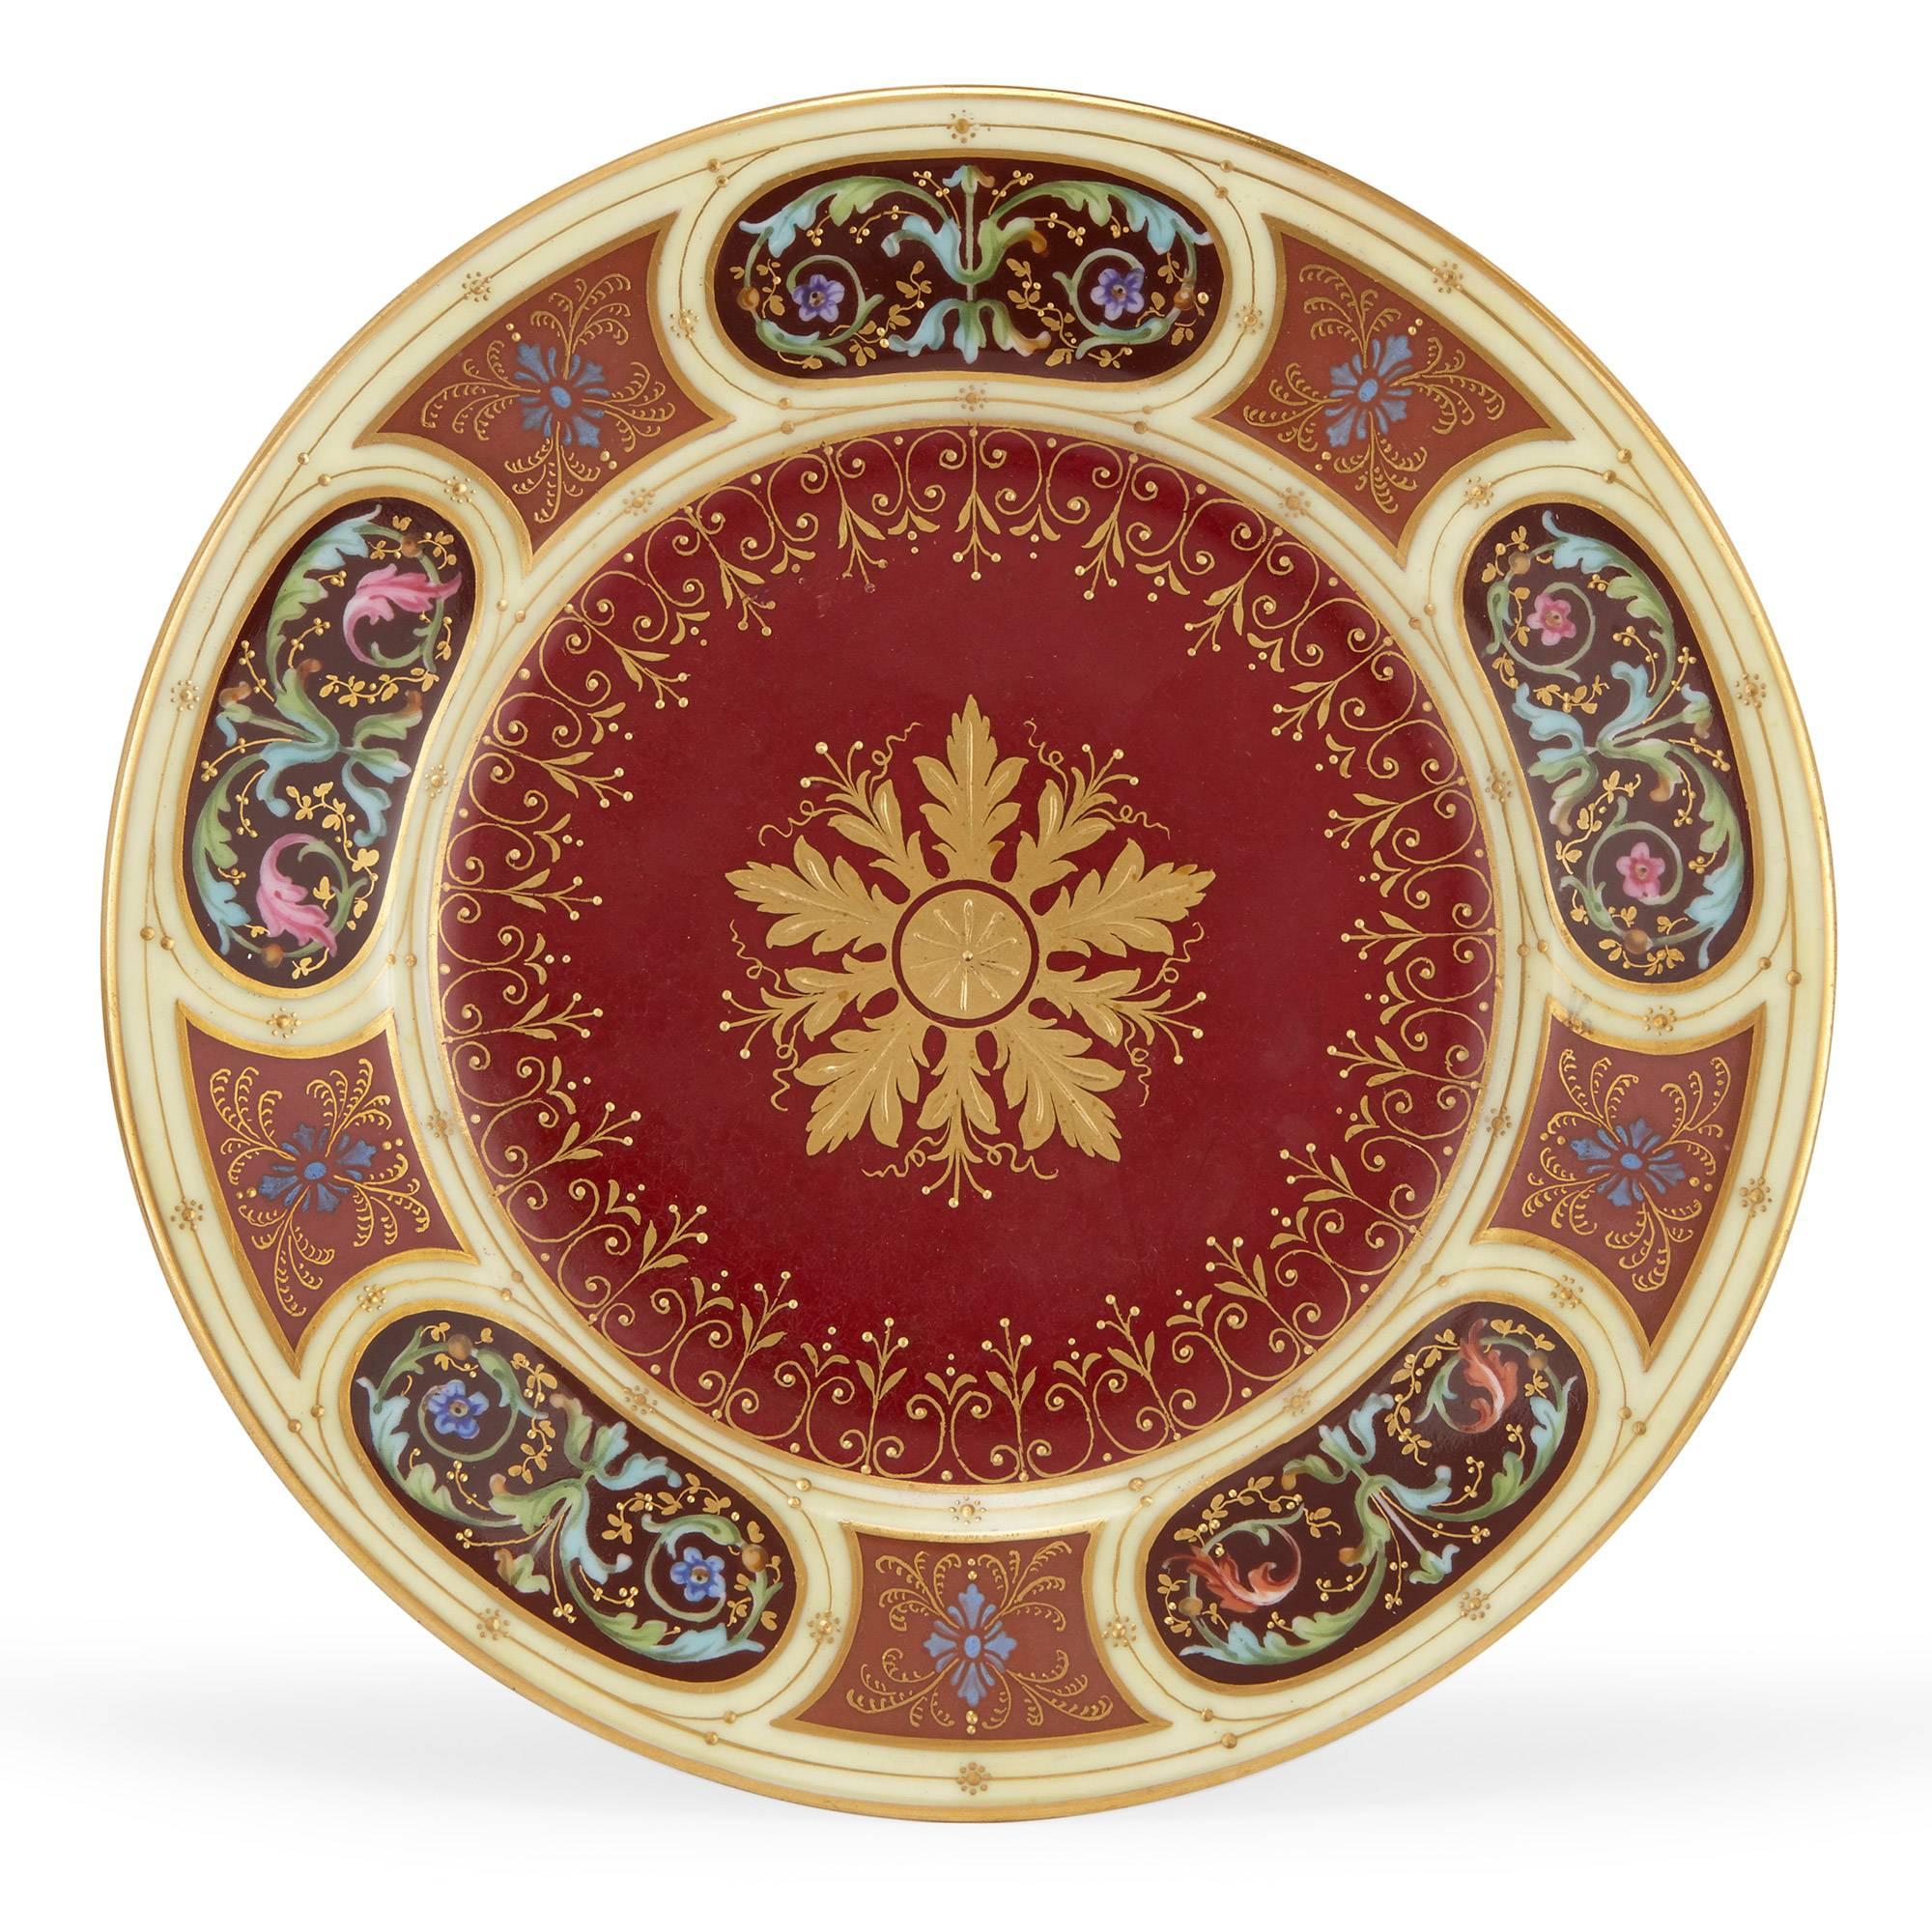 This stunning antique porcelain service was made by the prestigious Austrian company, Royal Vienna Porcelain, who were the official porcelain suppliers to the Austro Hungarian Imperial household. The beautiful porcelain service comprises a tray,